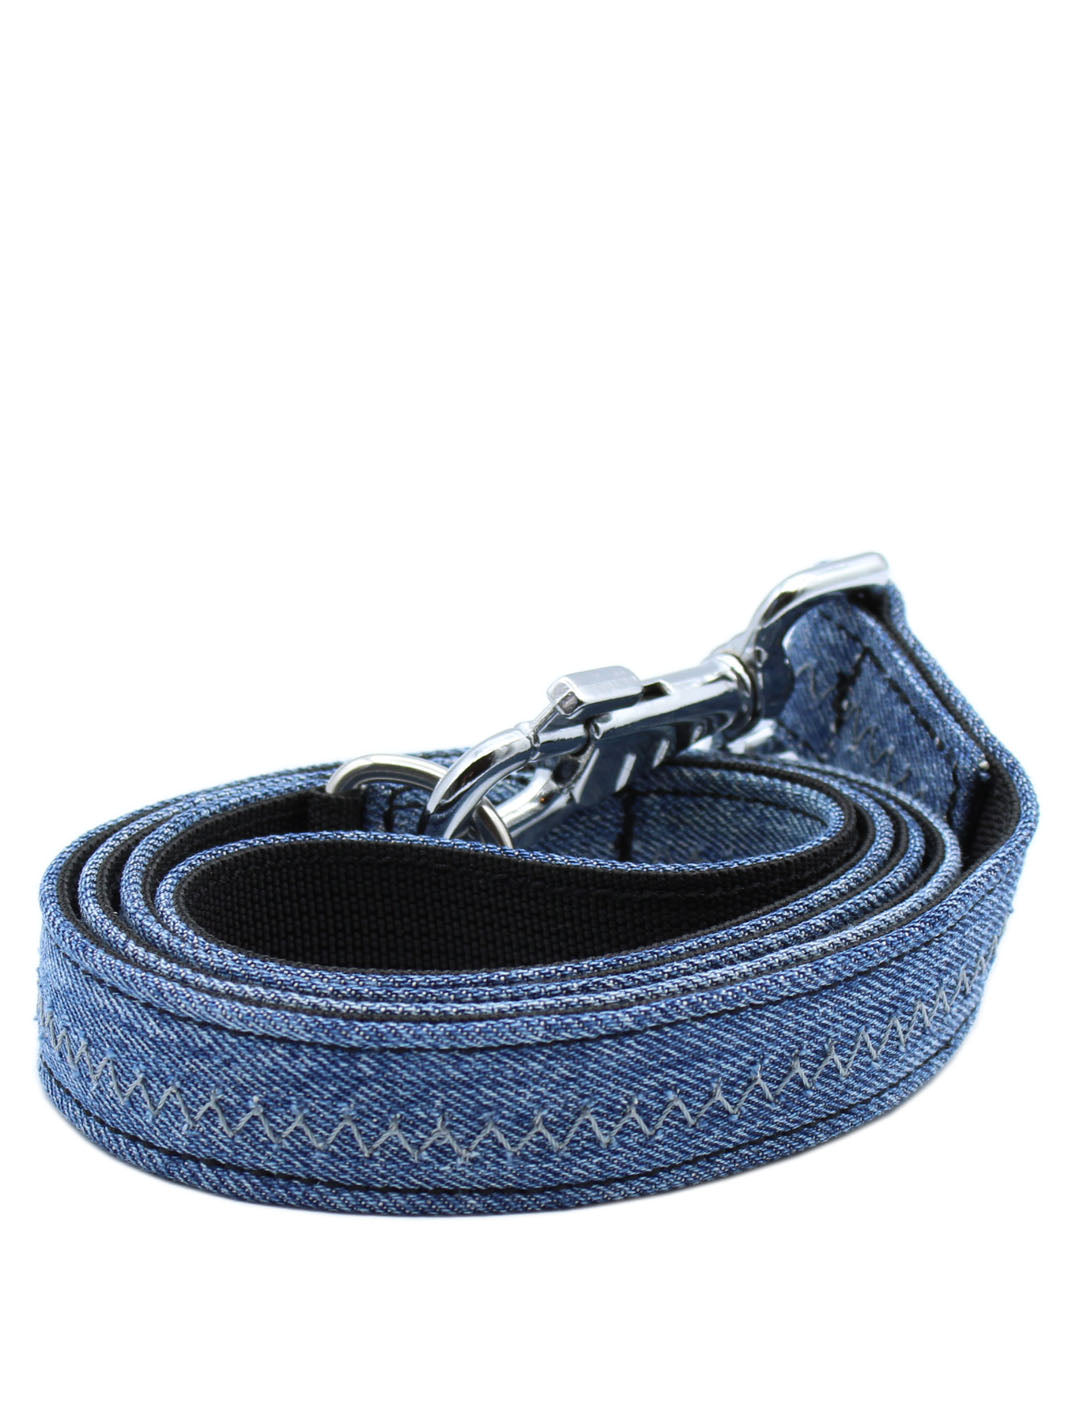 A blue denim dog leash that is hand crafted by MAGNUS Canis.